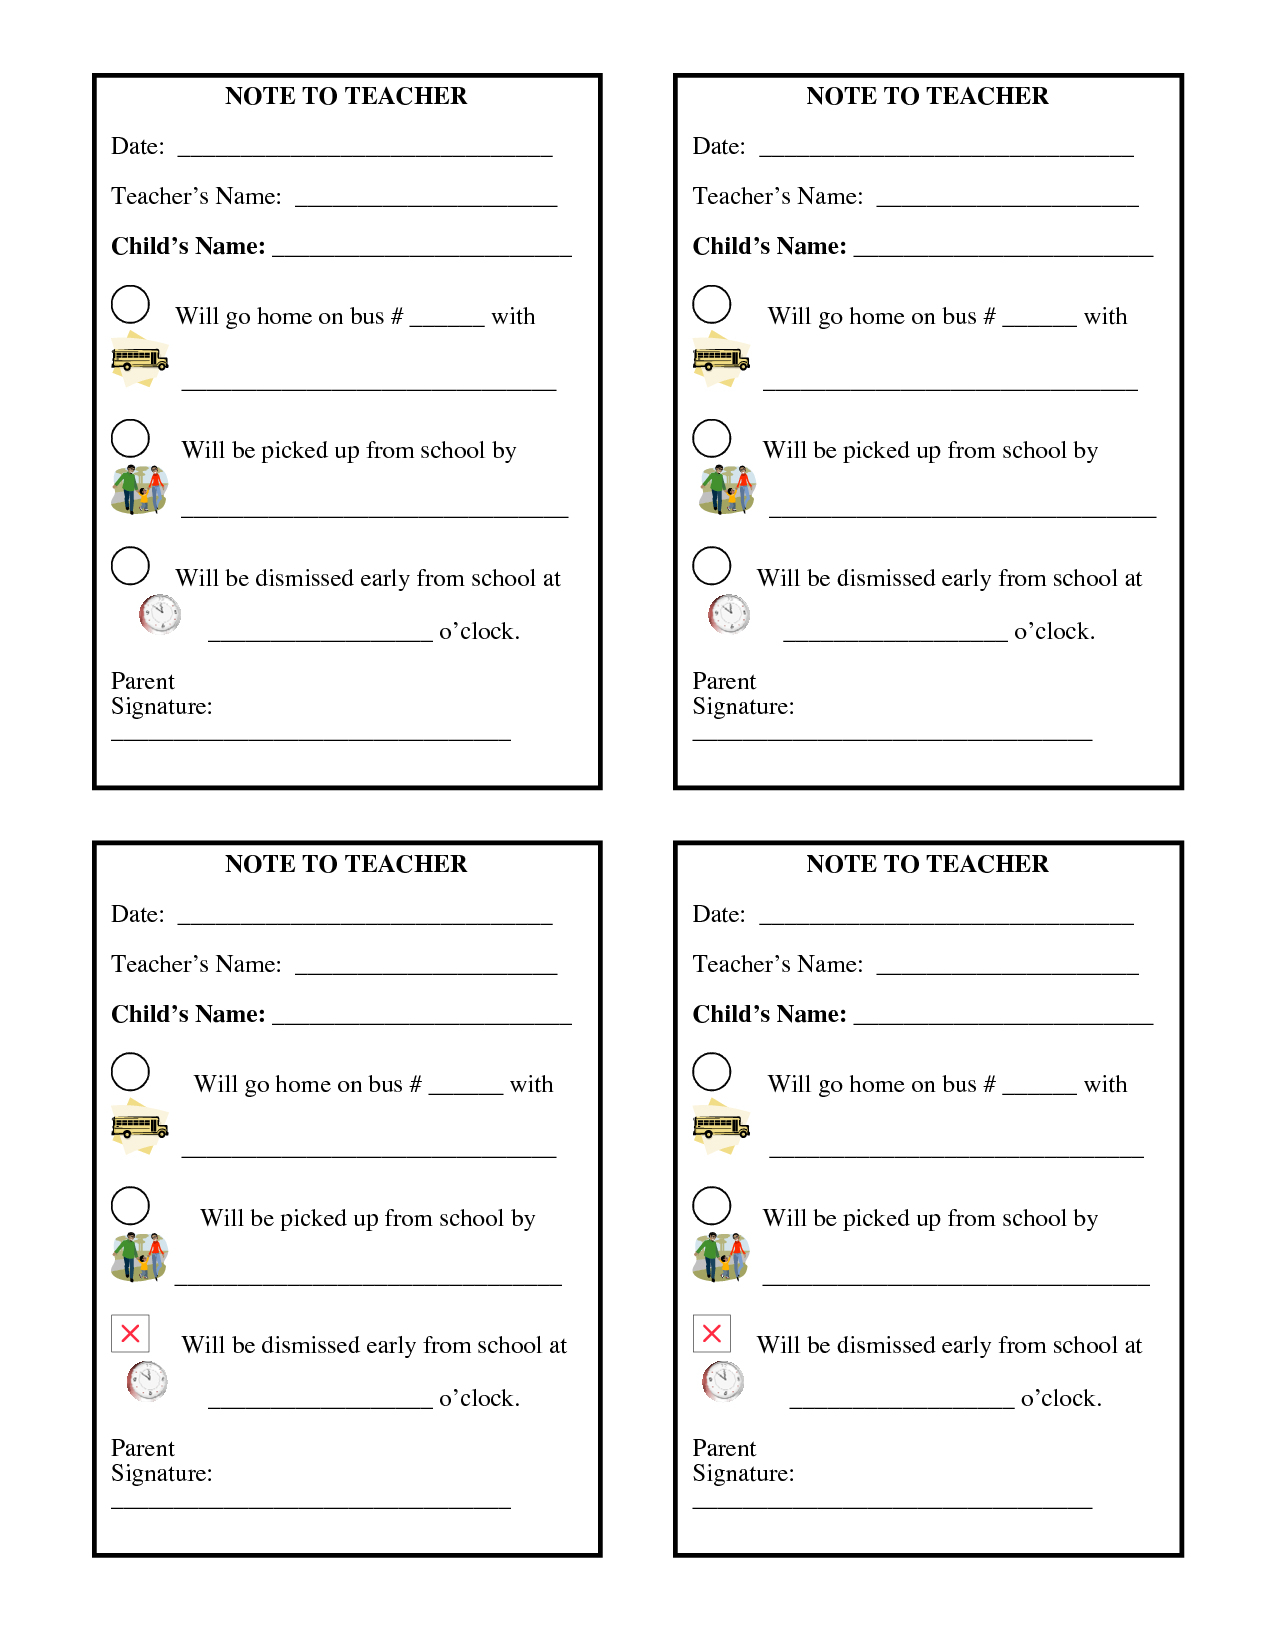 30 Images Of Pre-K Weekly Assessment Template | Bfegy - Free Printable Pre K Assessment Forms